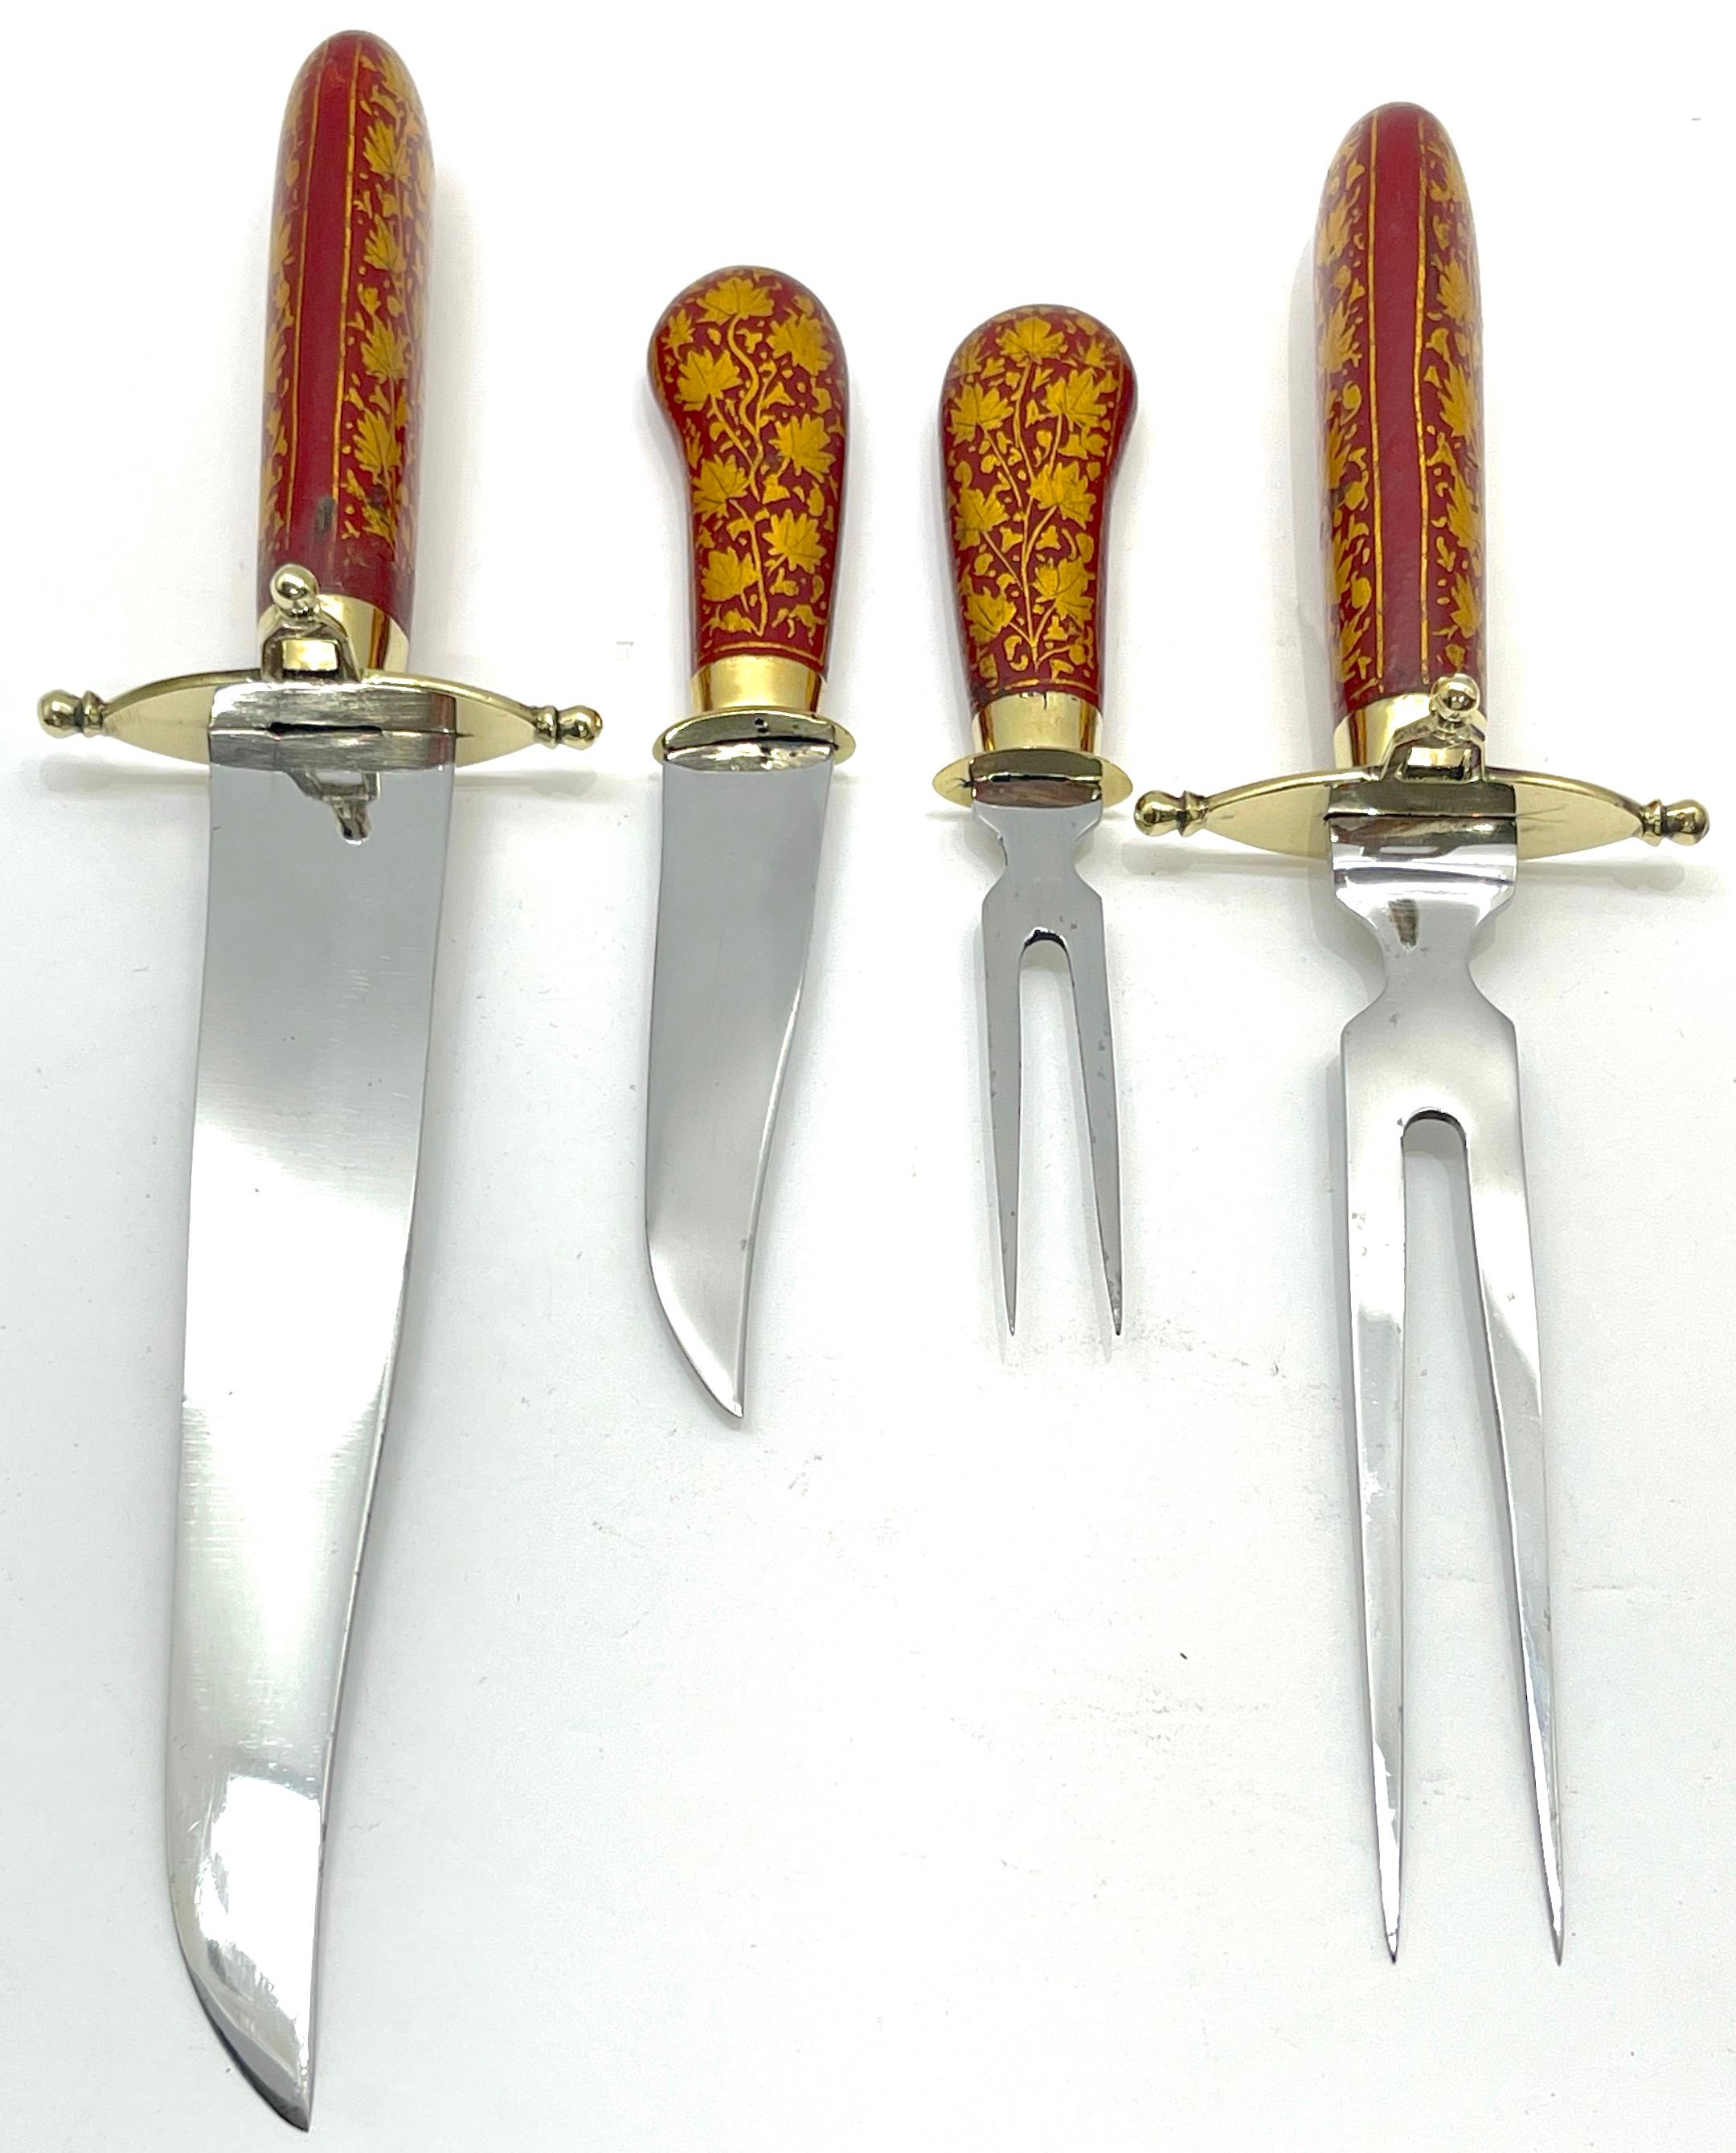 Anglo-Indian Red and Gilt Lacquer and Brass Carving Set For Sale 5